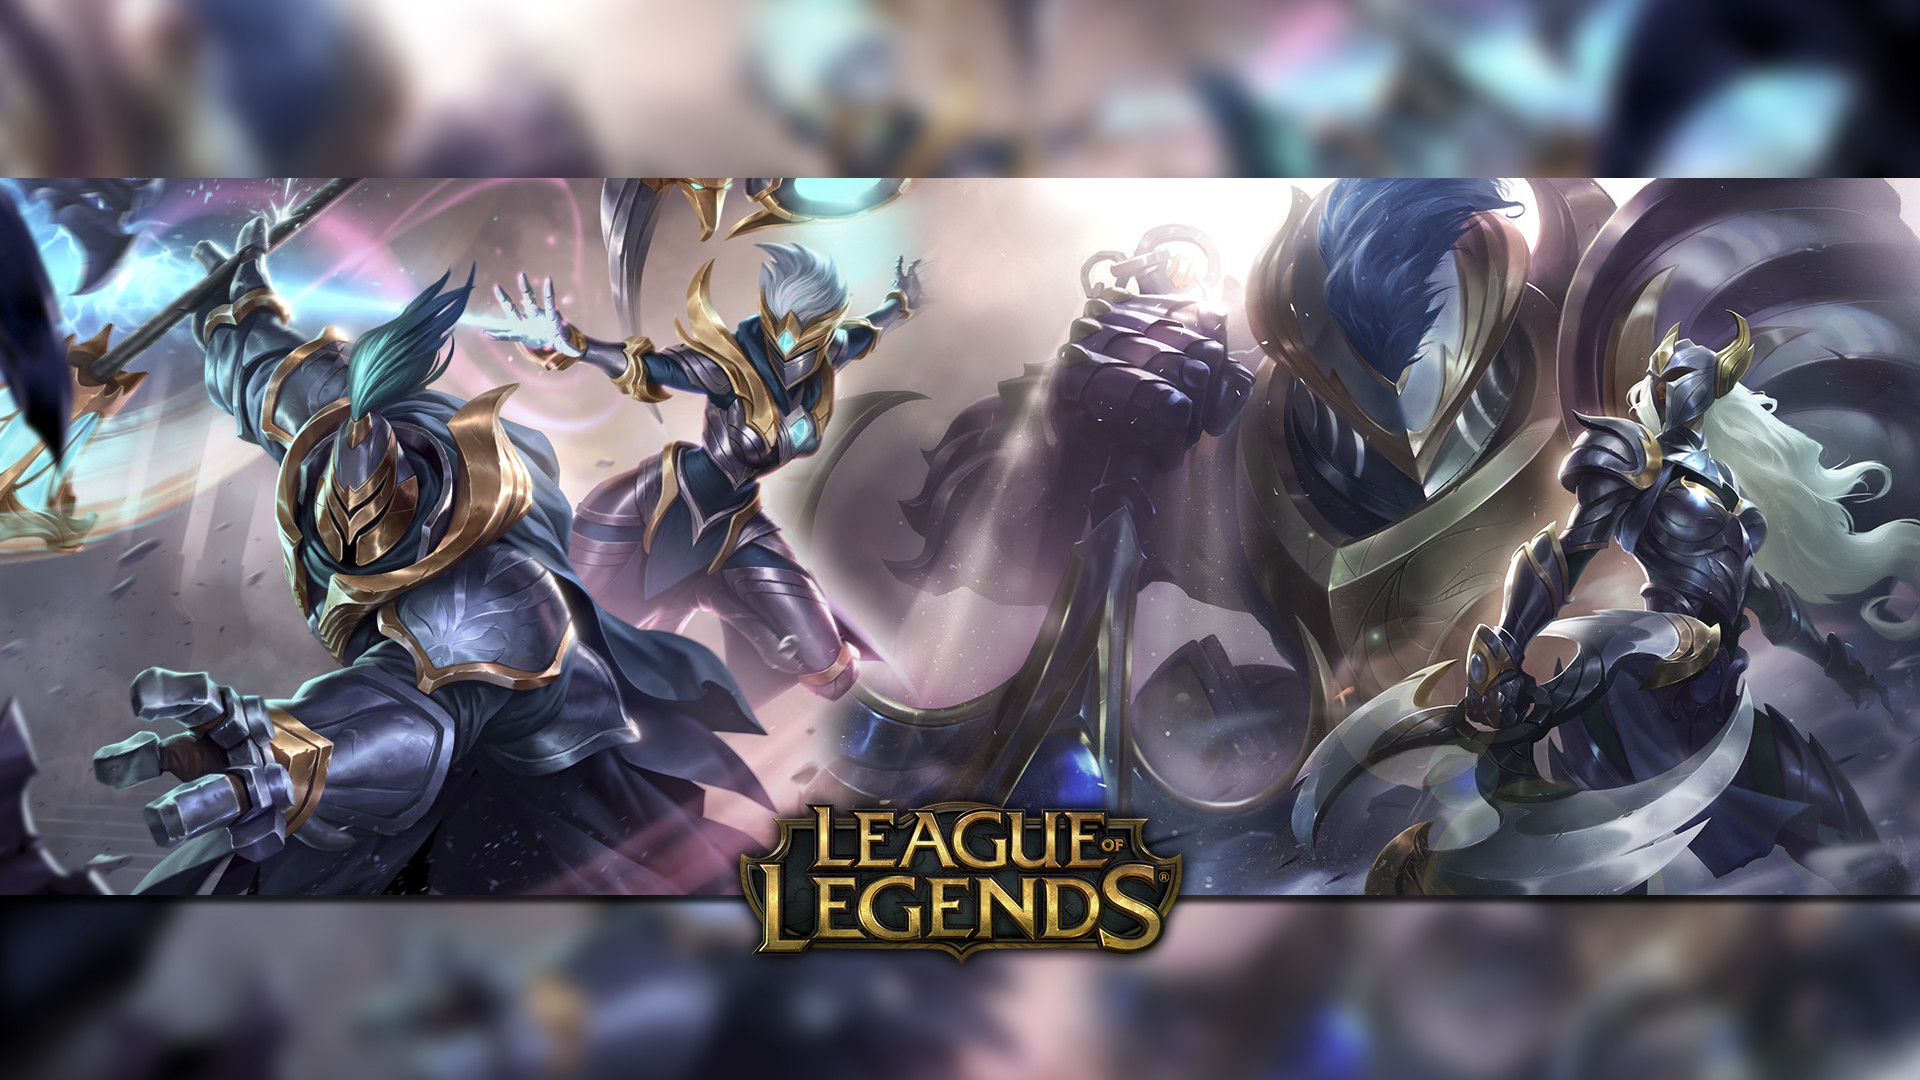 1920x1080 League of Legends Wallpapers Warden by ViciousBlue League of Legends  Wallpapers Warden by ViciousBlue